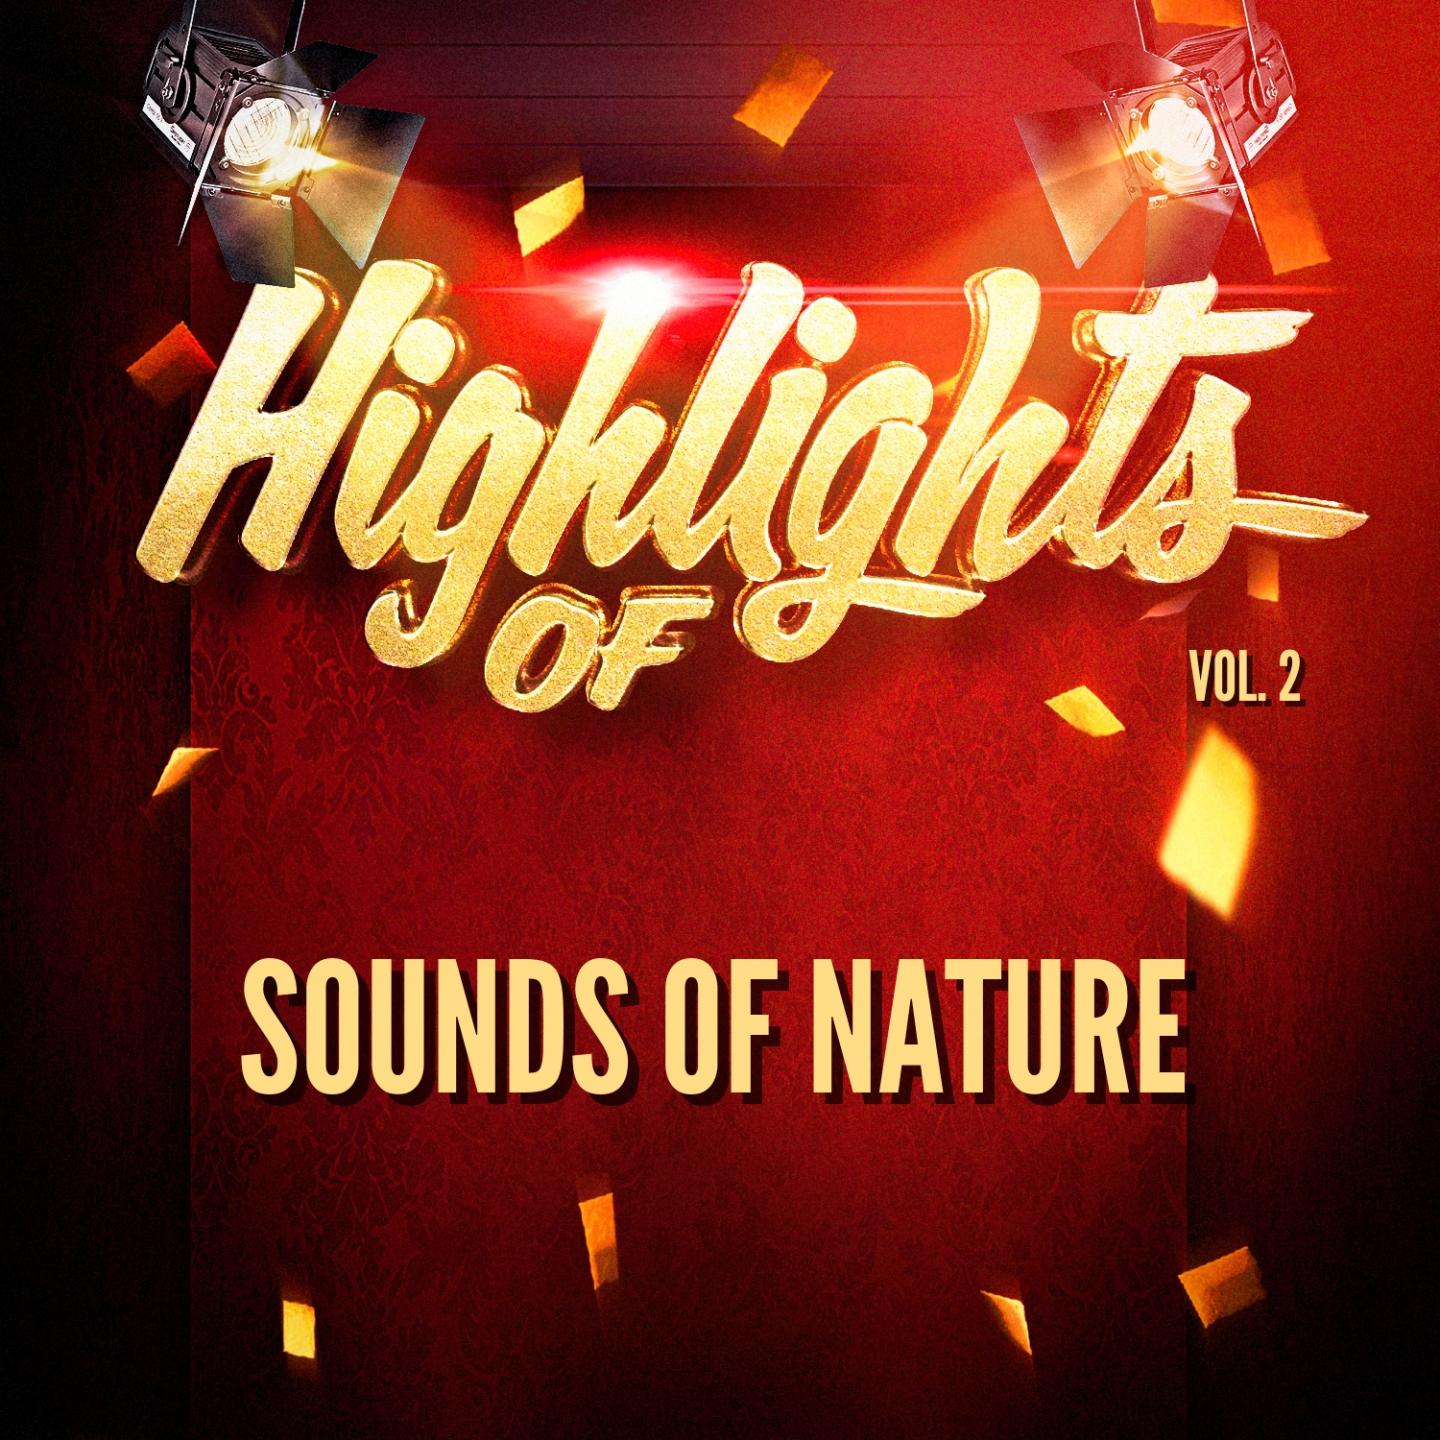 Highlights of Sounds of Nature, Vol. 2